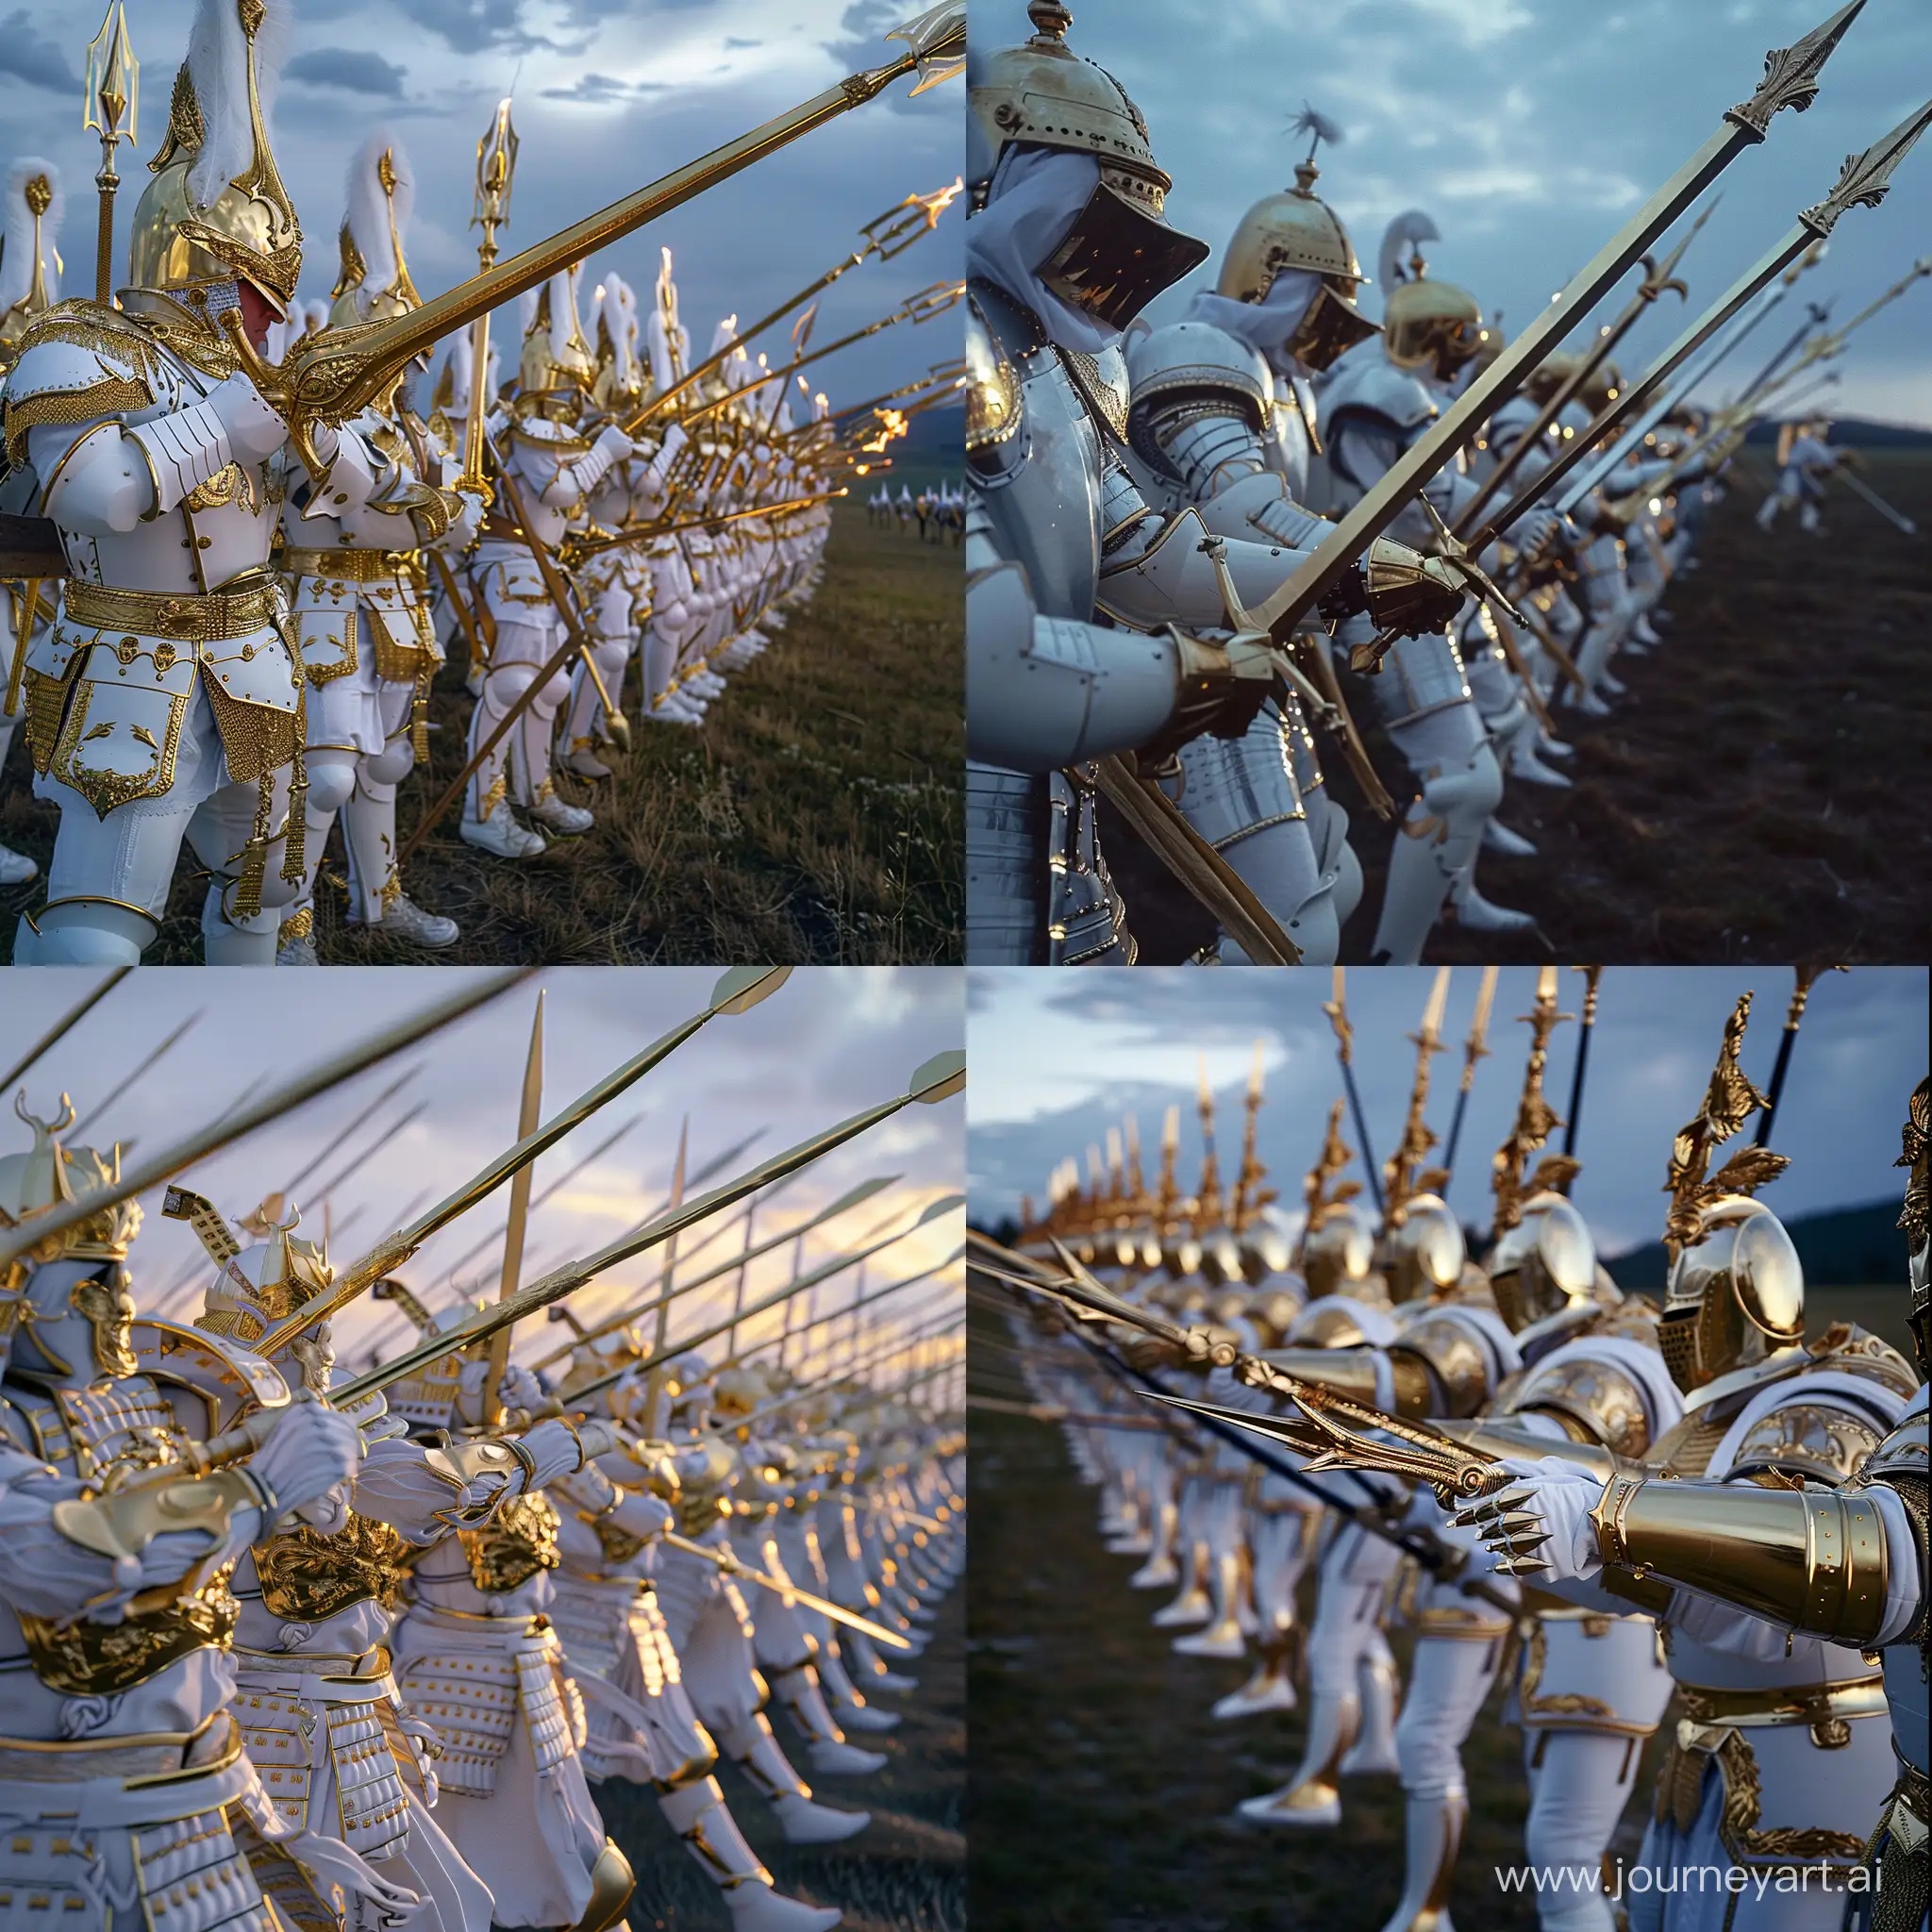 soldiers line up in close battle formation, the soldiers are about to attack an enemy in an open field at dusk , white and gold armor, gold swords and spears drawn in the air, golden helmets ,